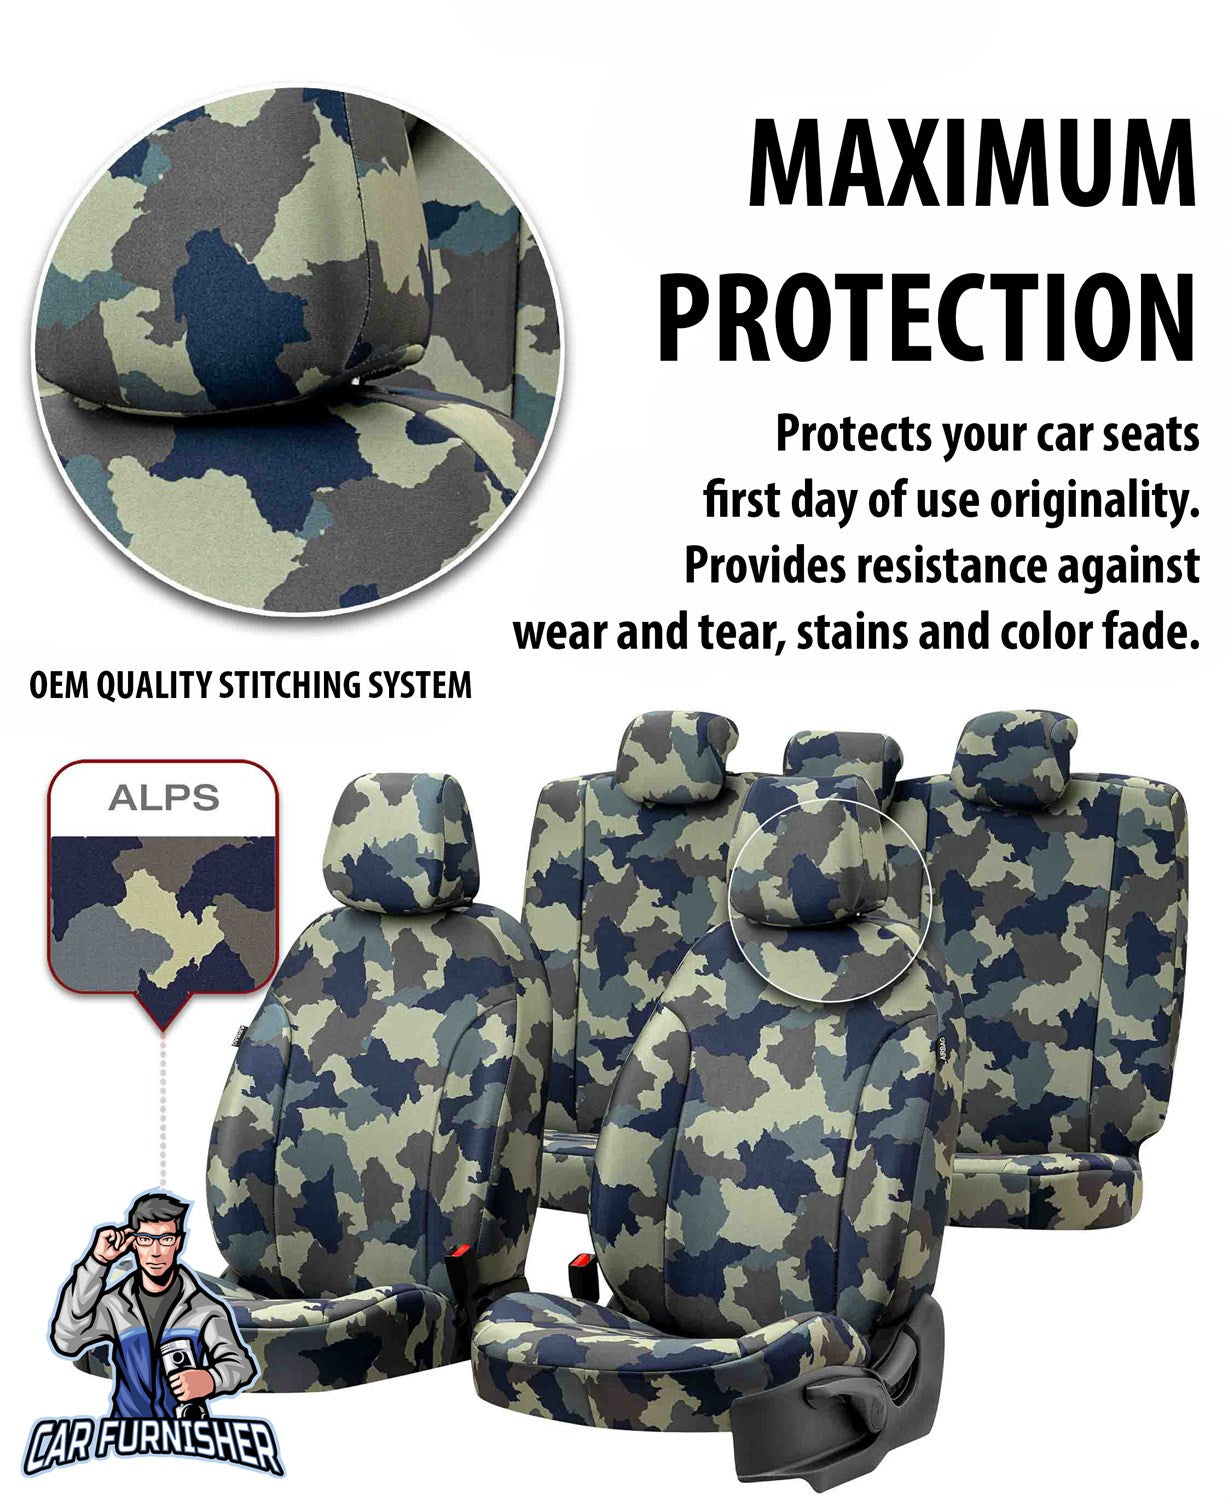 Chevrolet Cruze Seat Covers Camouflage Waterproof Design Montblanc Camo Waterproof Fabric